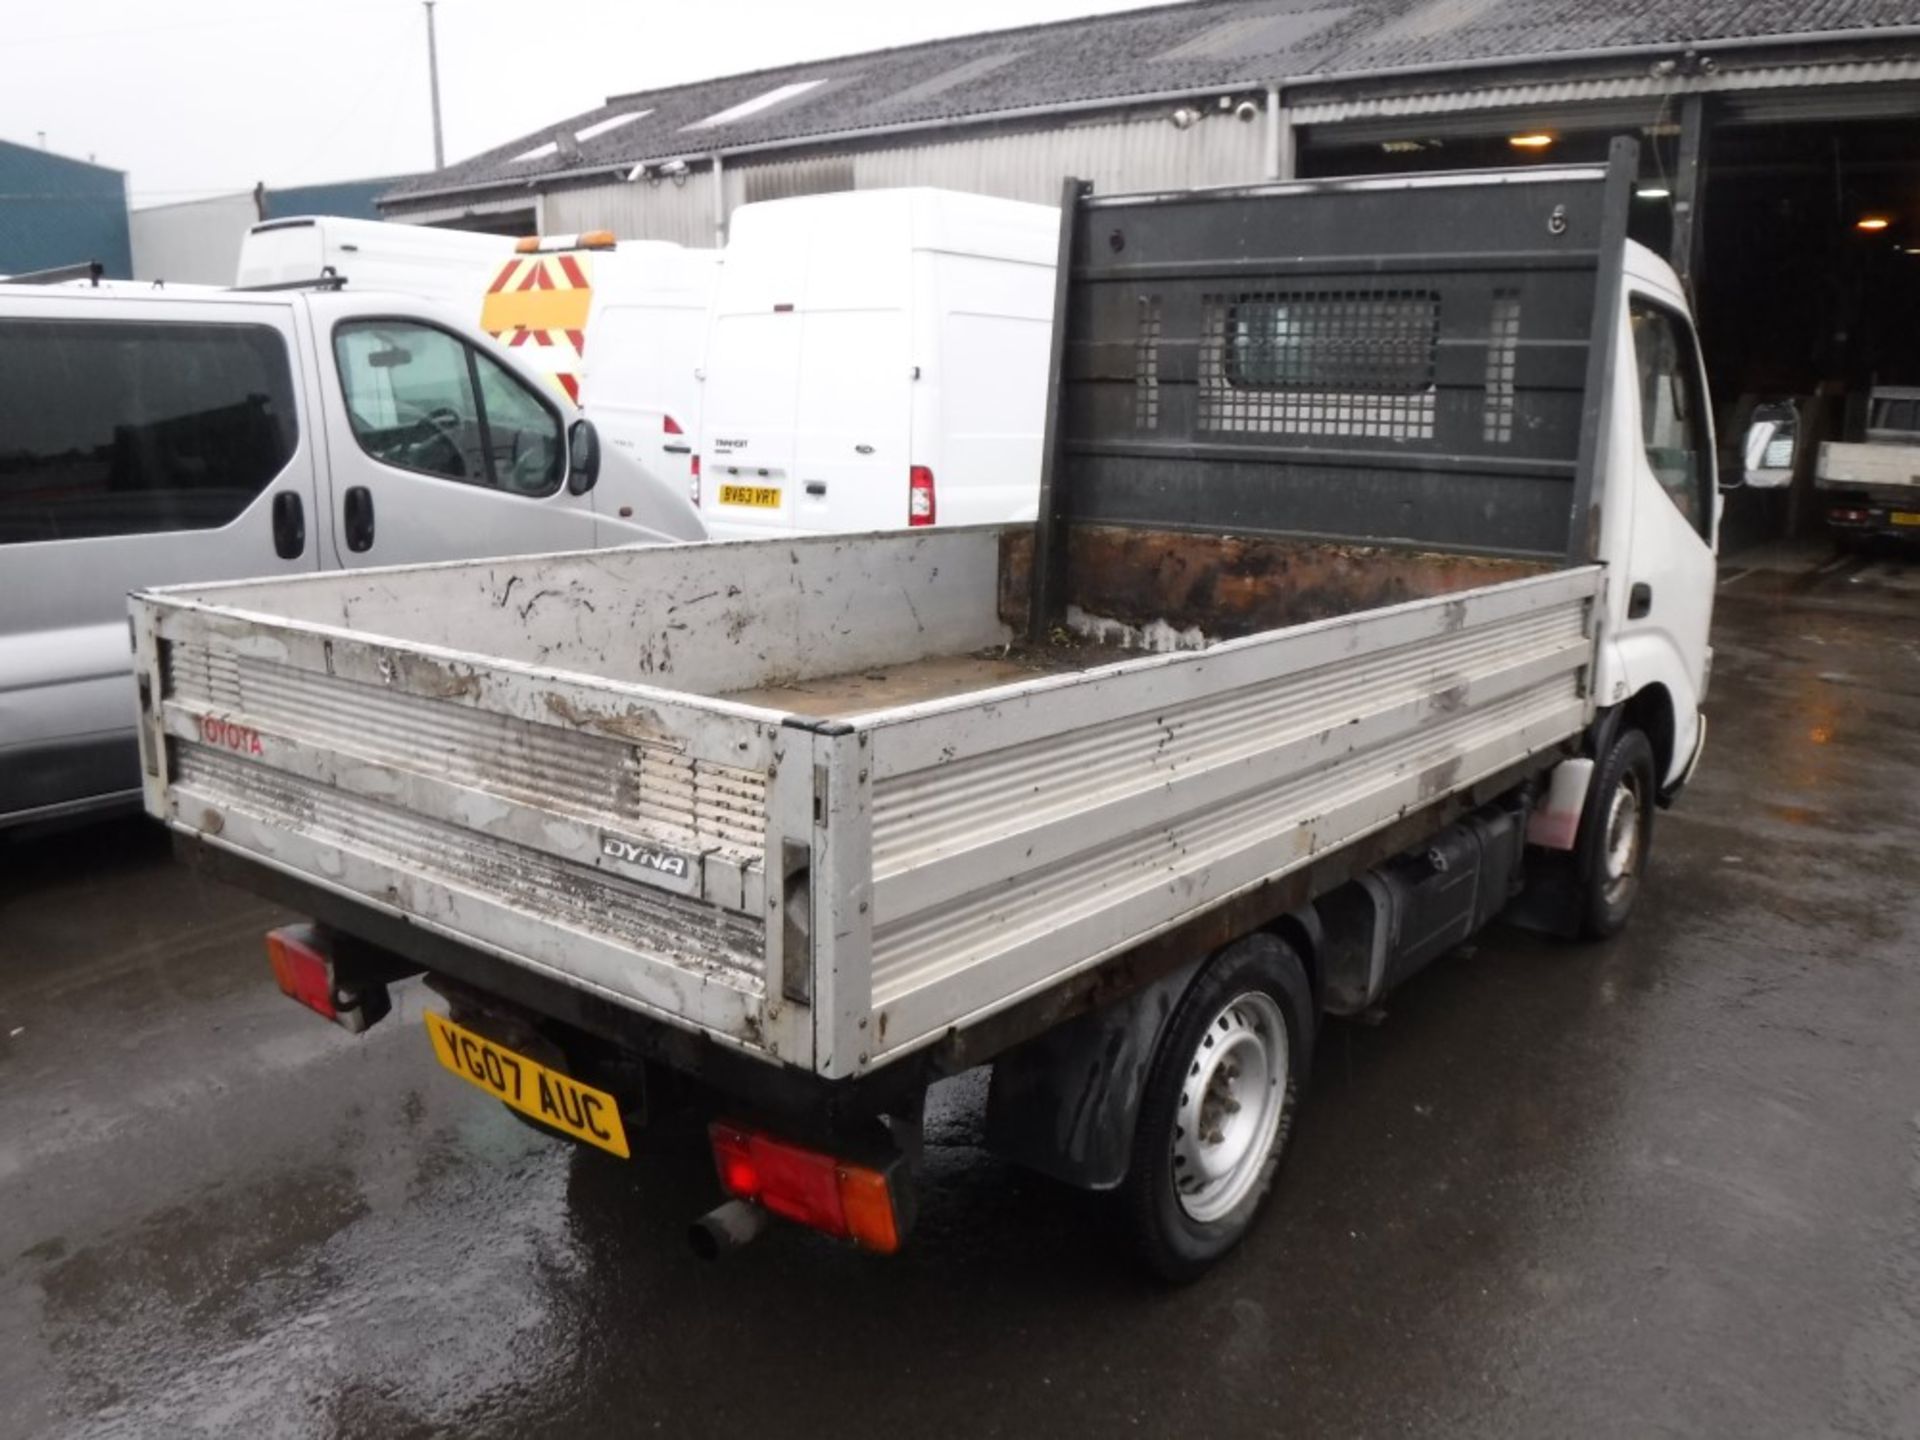 07 reg TOYOTA DYNA 300 D-4D DROPSIDE LORRY, 1ST REG 08/07, 100929M WARRANTED, V5 HERE, 1 OWNER - Image 4 of 5